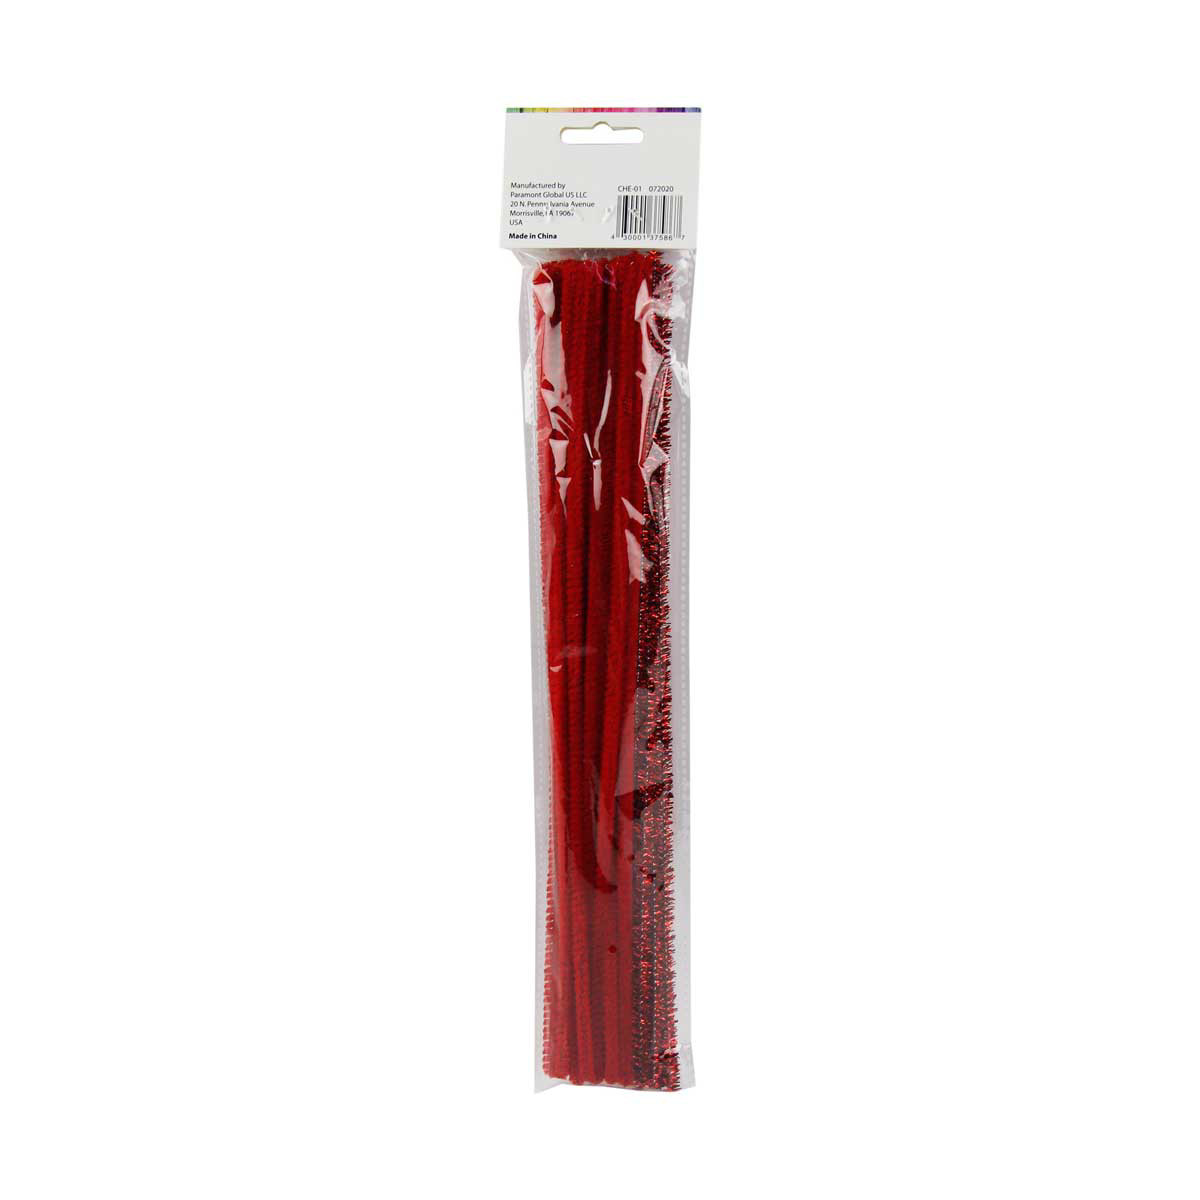 Make Shoppe Tinsel & Regular Chenille Stem, Red, 35 Count, 6Mm X 12Inch